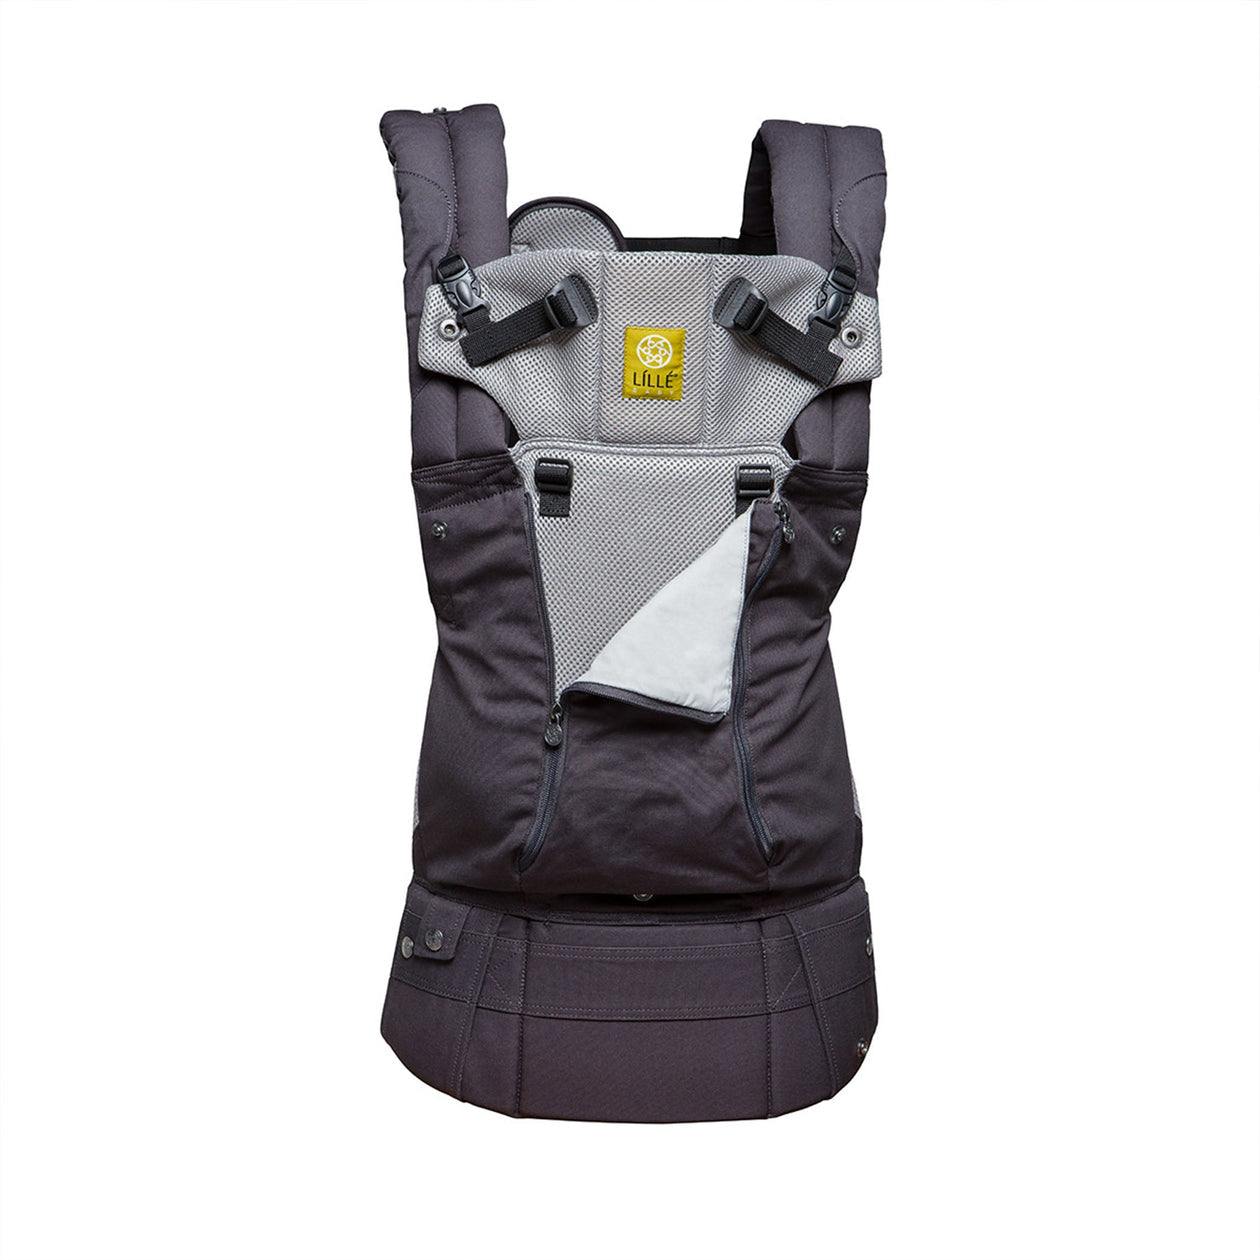 Baby Carrier Newborn To Toddler Complete All Seasons In Charcoal Silver